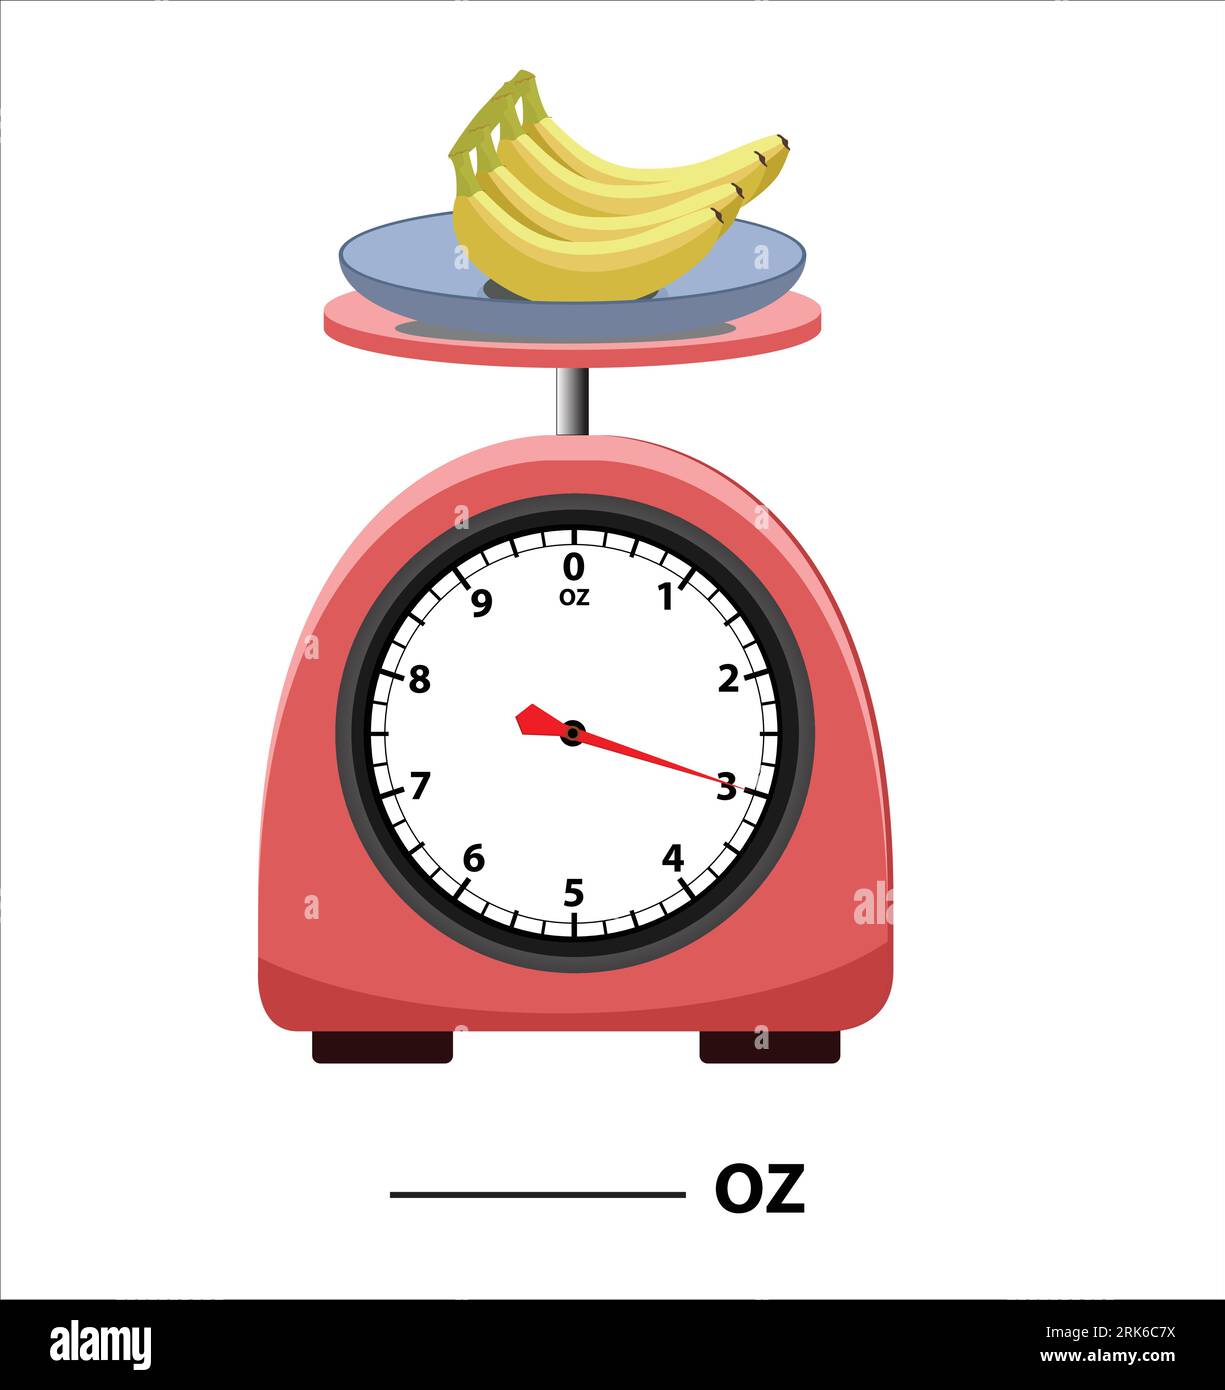 https://c8.alamy.com/comp/2RK6C7X/measuring-scale-oz-analog-weight-scale-banana-isolated-on-white-background-simple-kitchen-scale-vector-illustration-measuring-analog-scale-clip-2RK6C7X.jpg